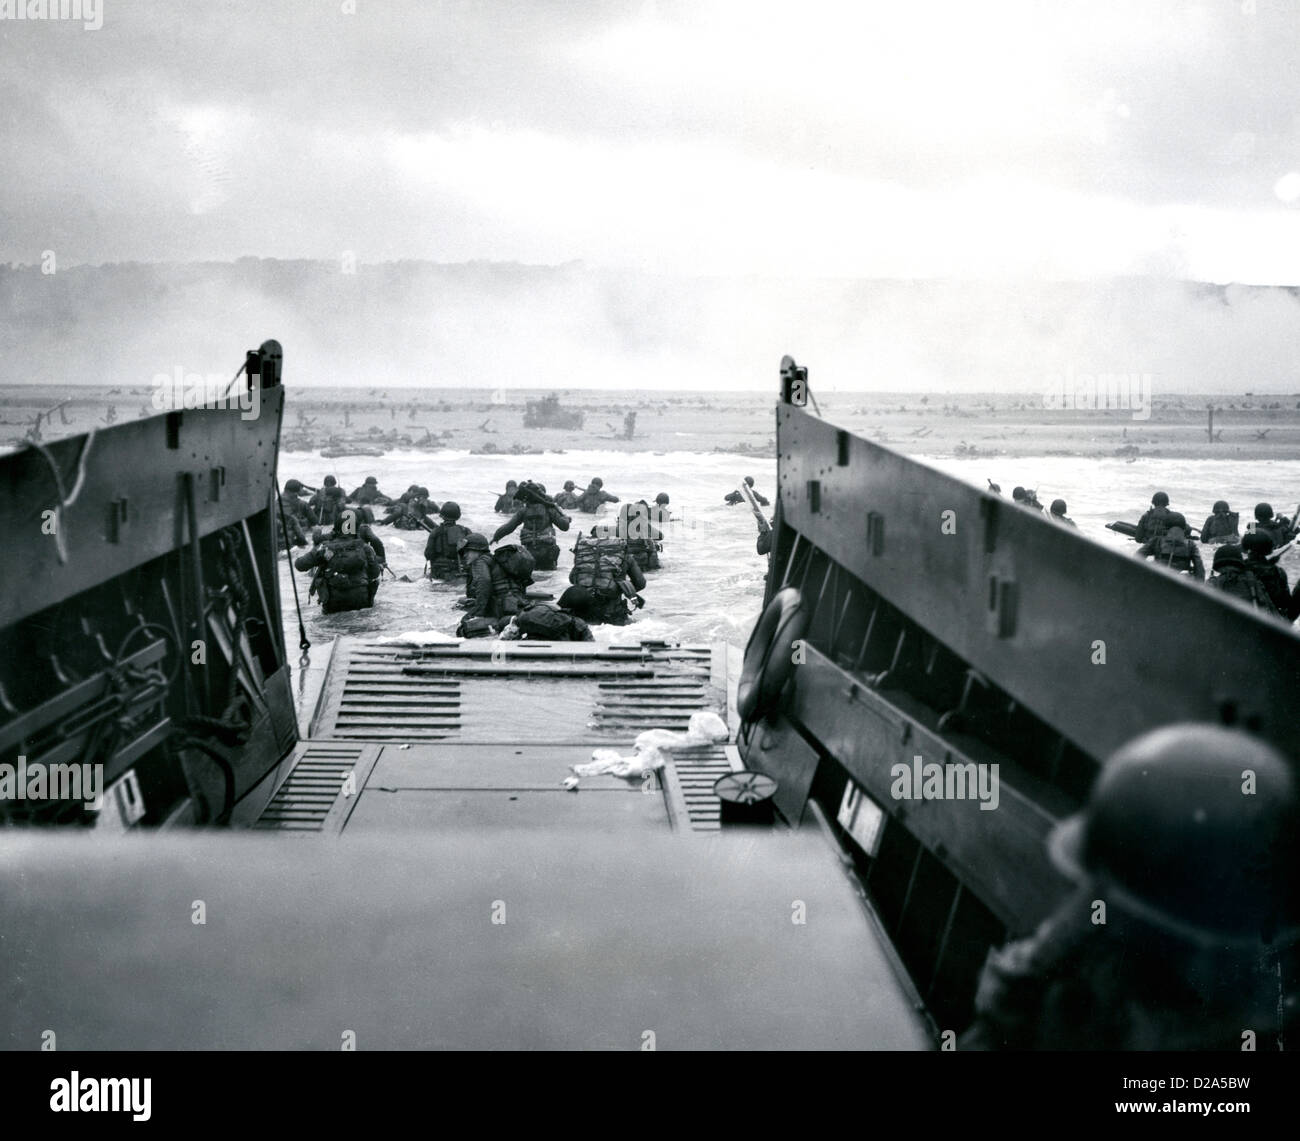 Landing Barge D-Day Invasion Of France. World War Ii Stock Photo